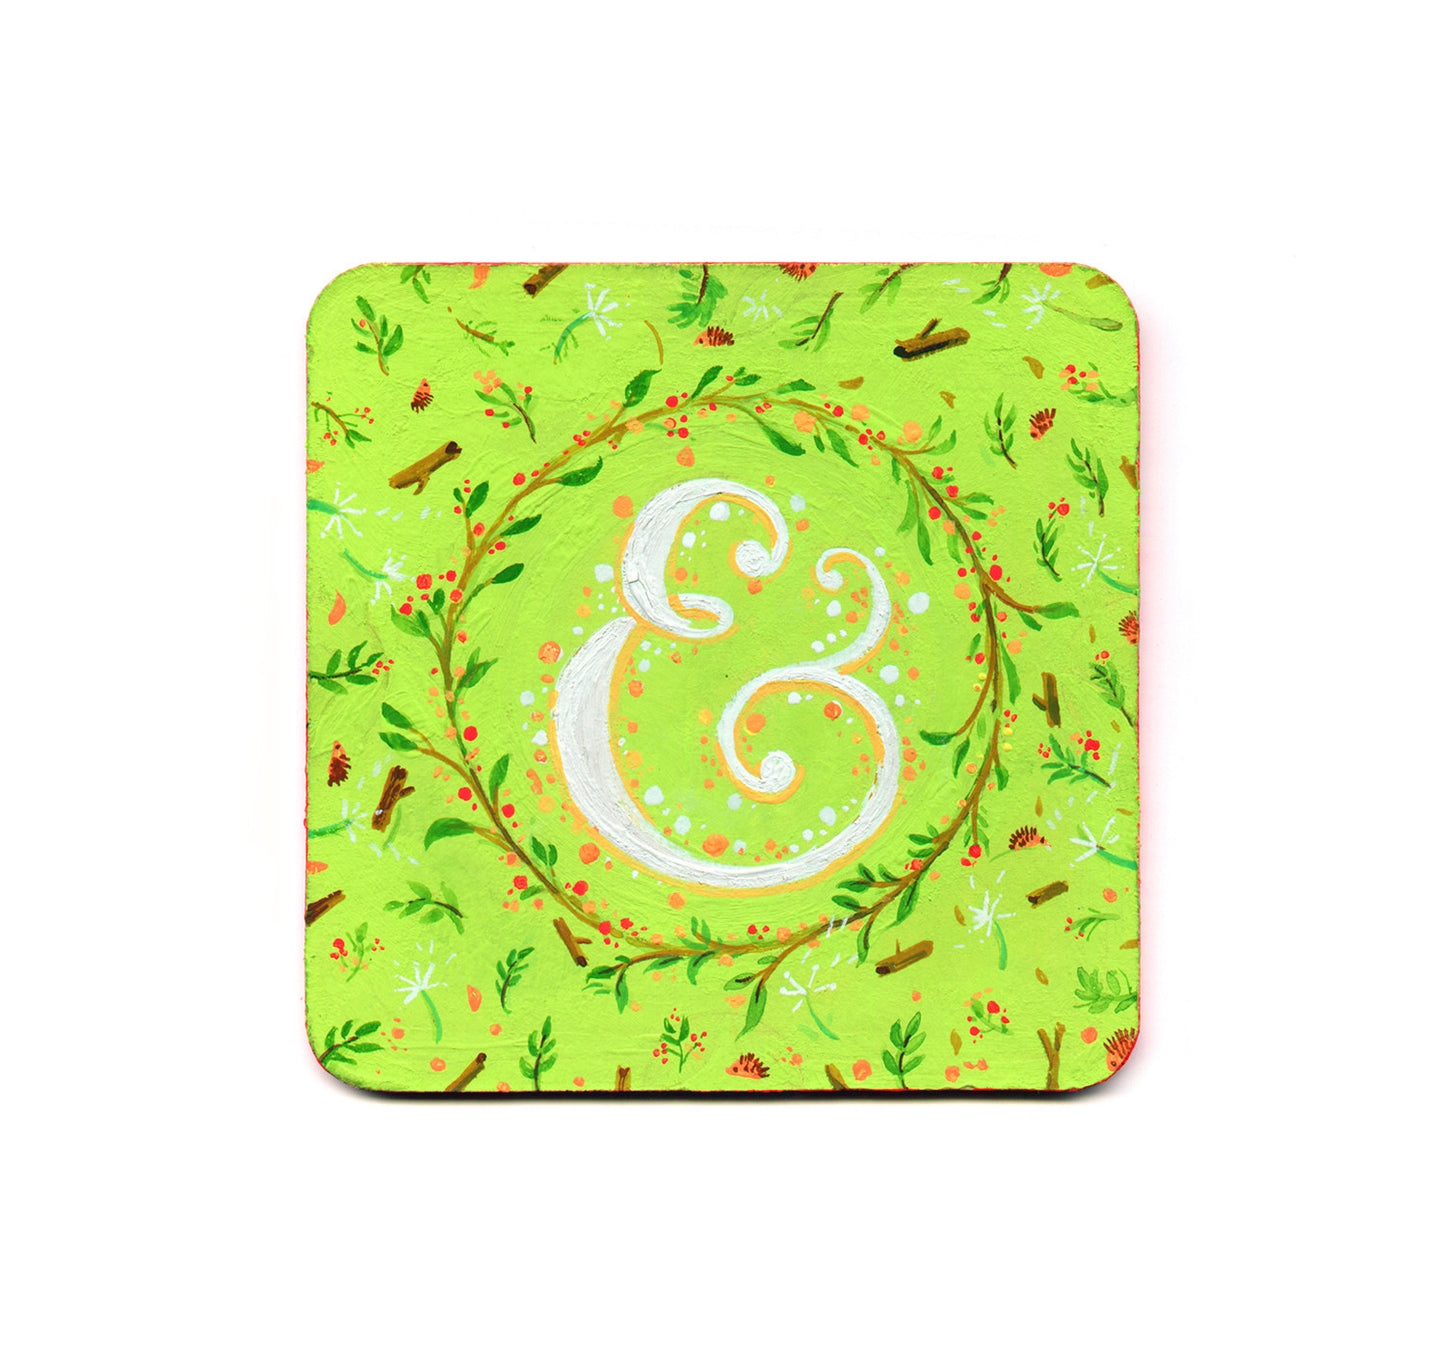 S1 Xian Qing Chen - Ampersand in the Woods Coaster